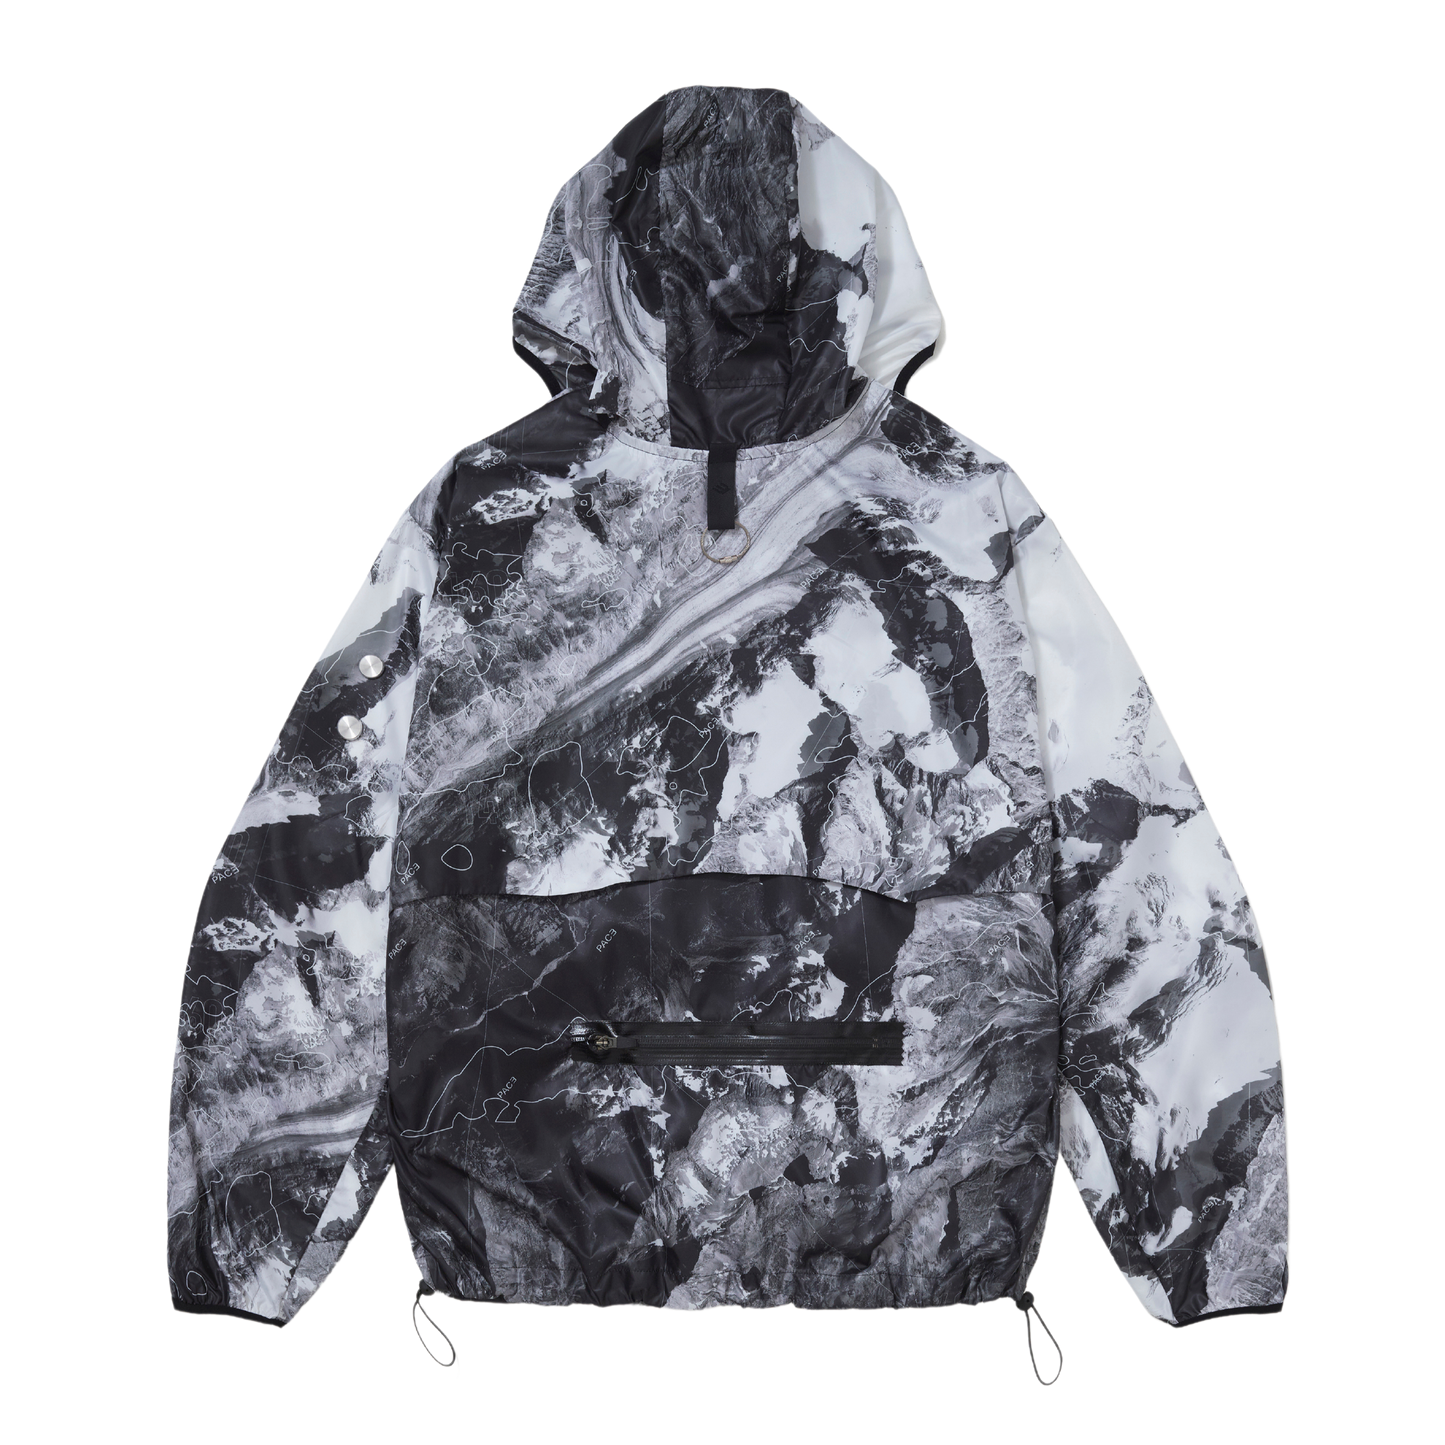 PACE - Windbreaker "Swiss Alps" - THE GAME